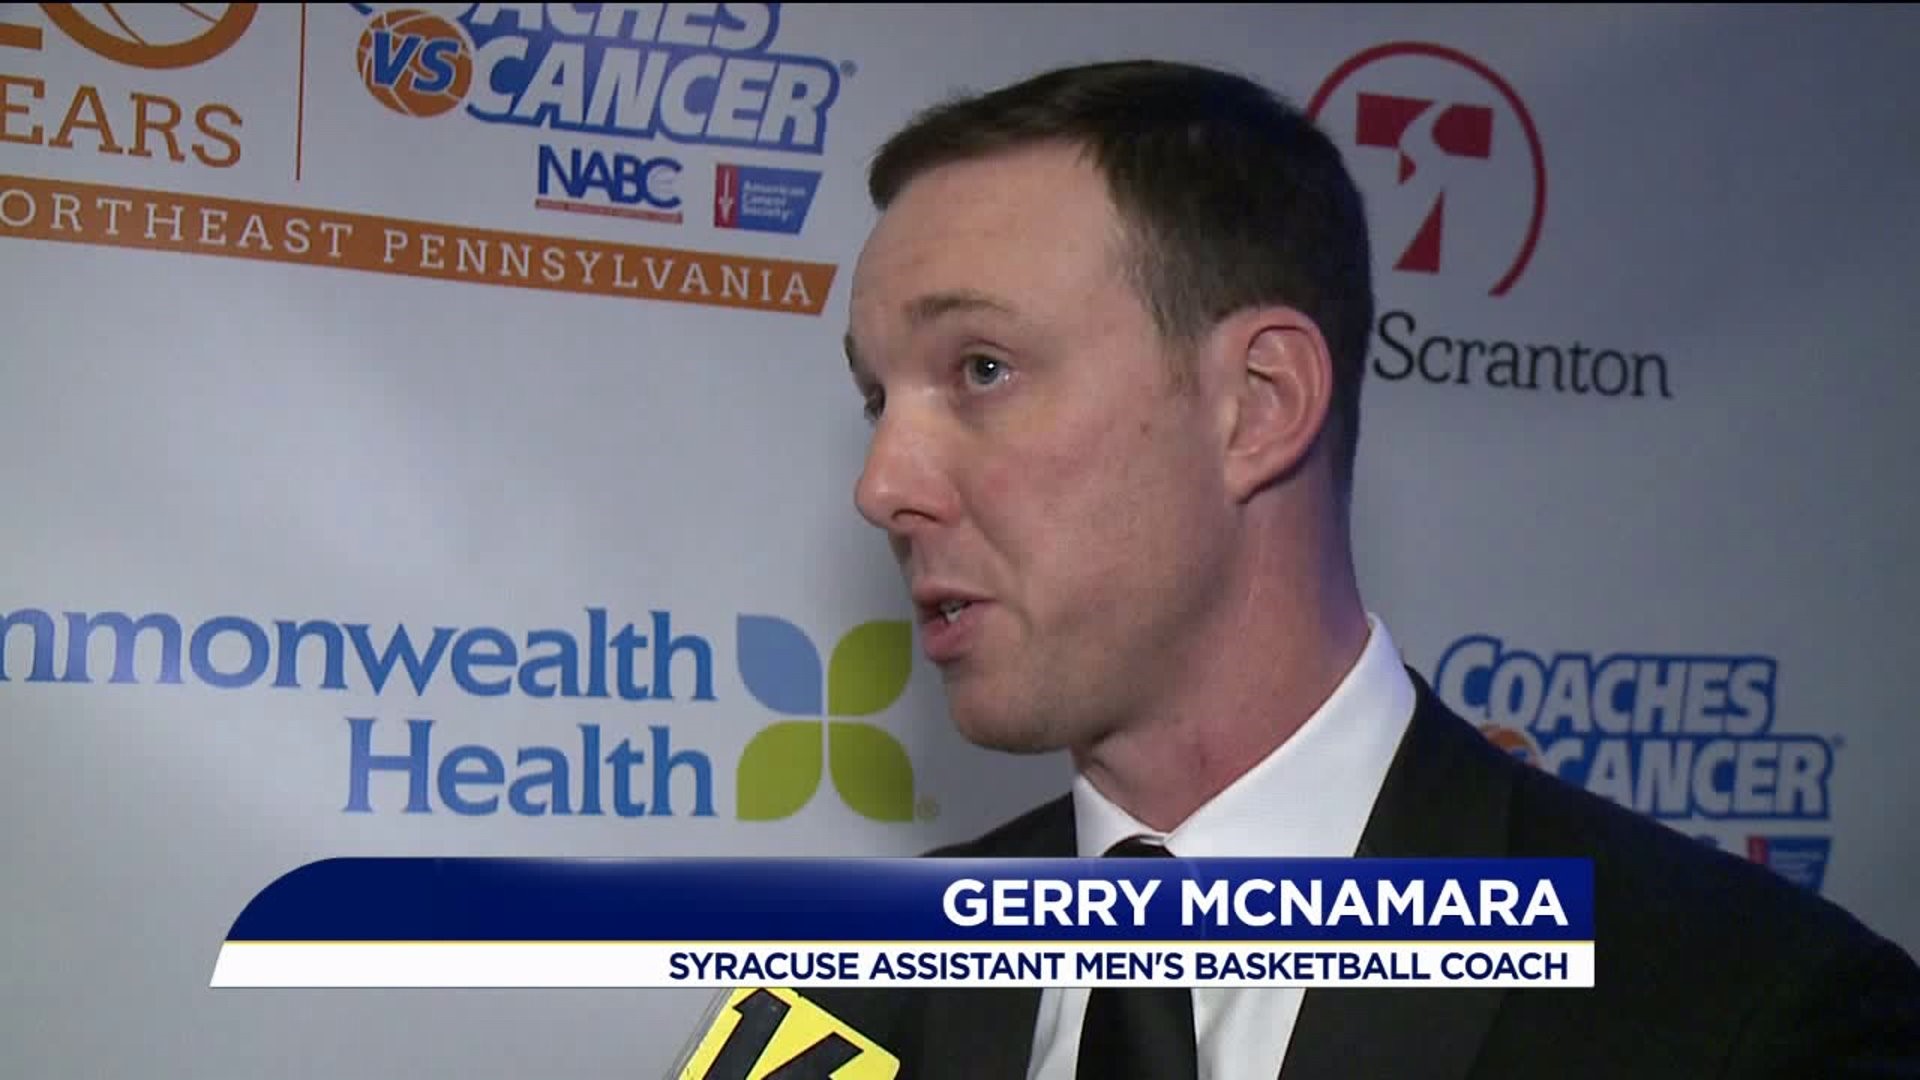 Gerry McNamara Excelling as Assistant Coach in Syracuse